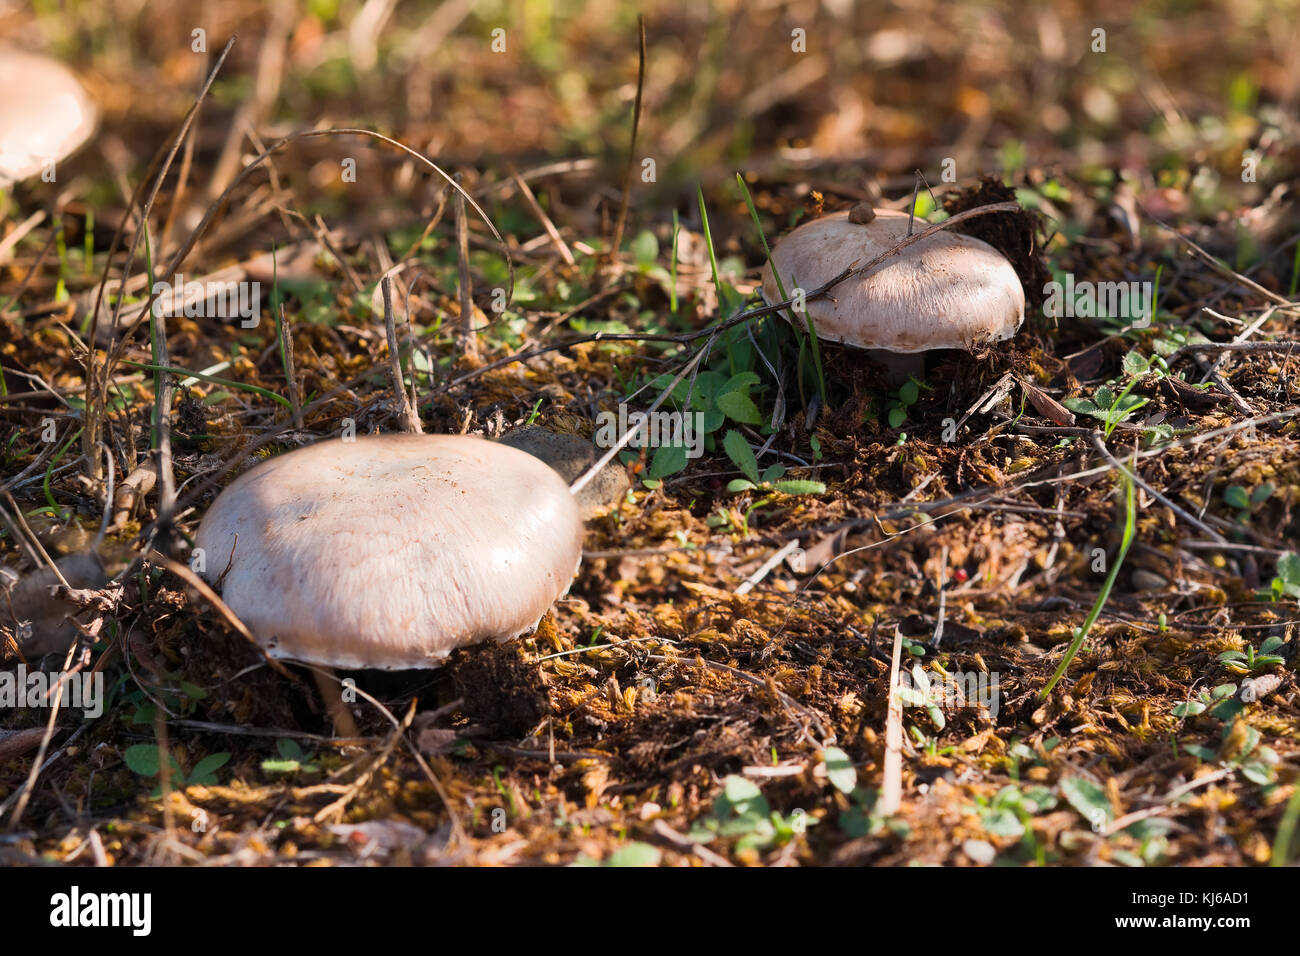 Detail of button mushrooms in the field among the grass. Stock Photo